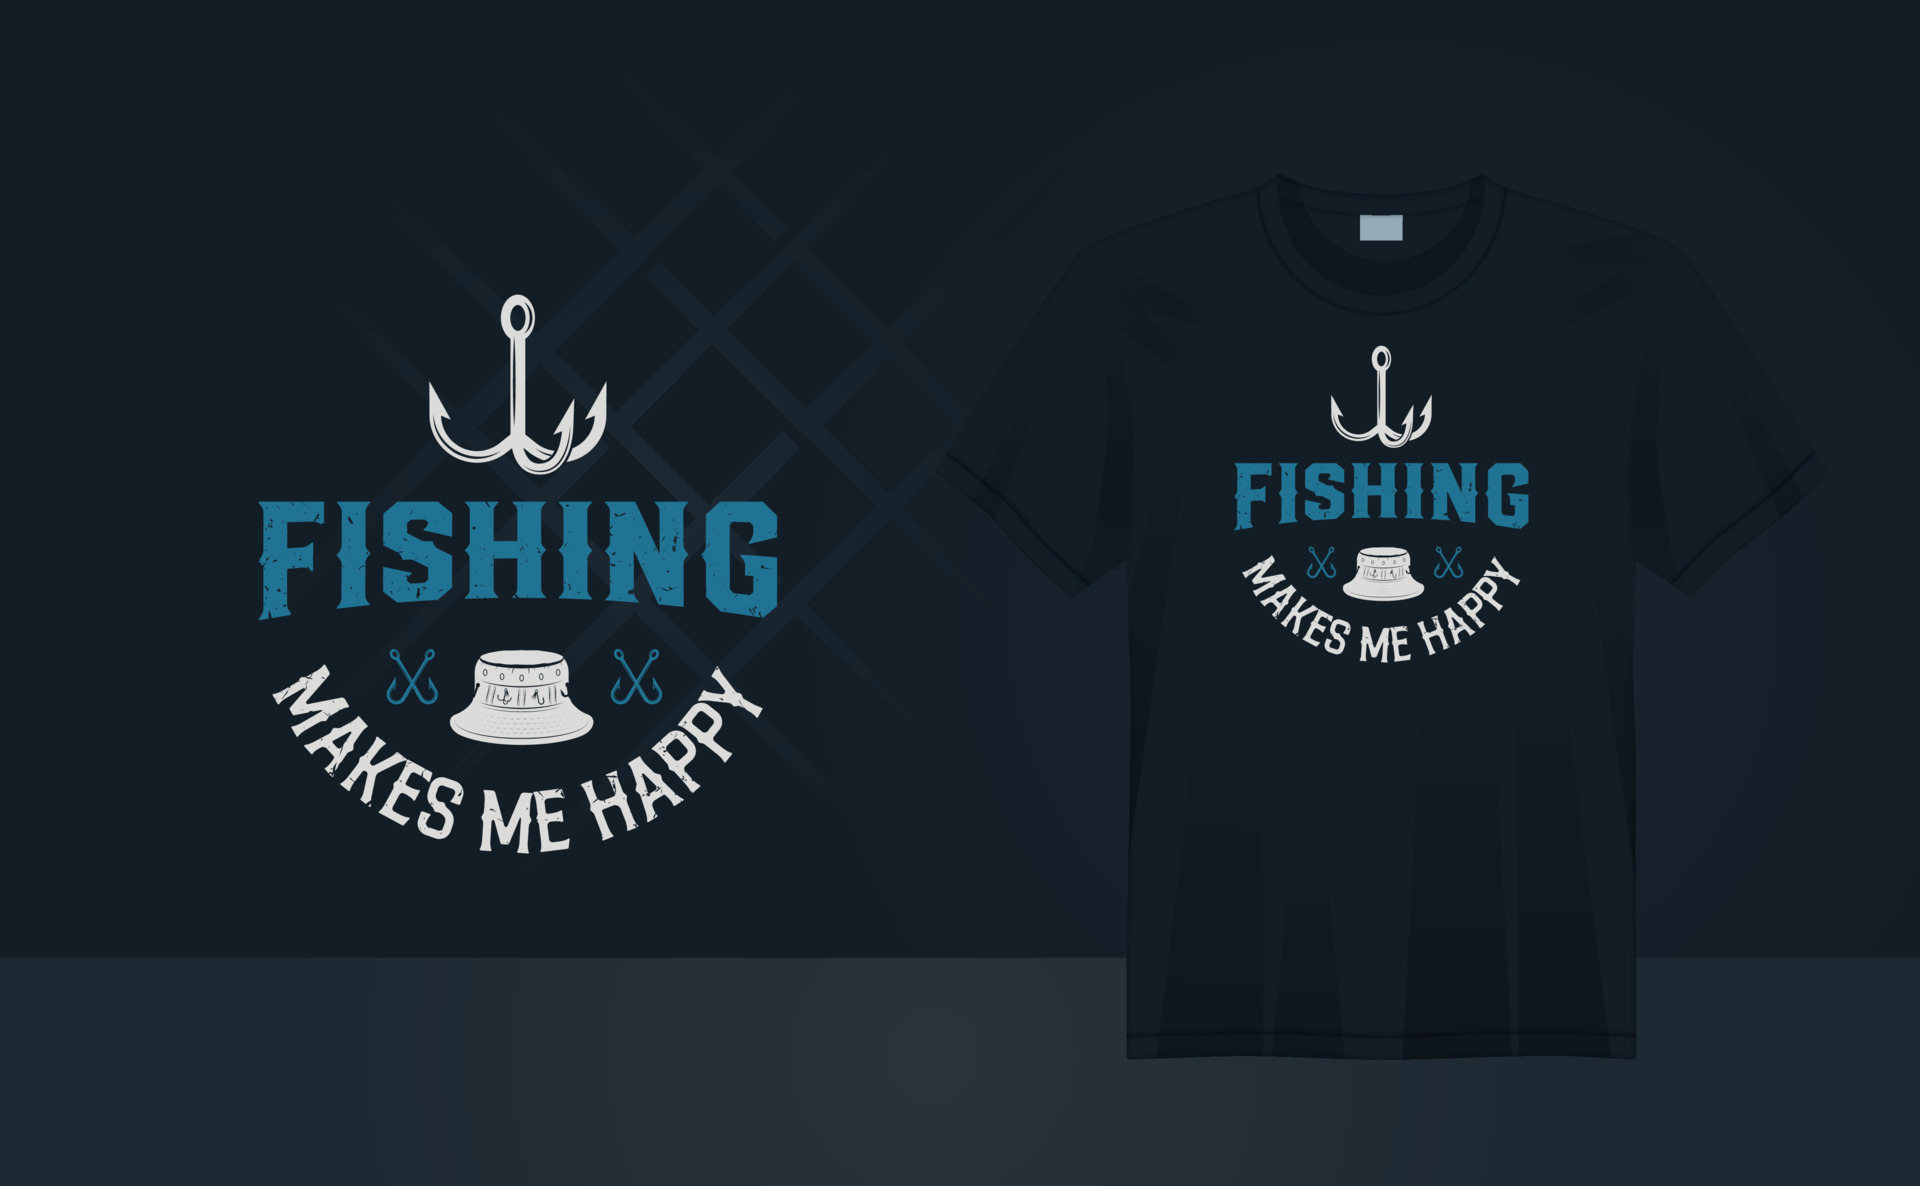 https://static.vecteezy.com/system/resources/previews/010/224/341/original/fishing-makes-me-happy-vintage-grunge-fishing-t-shirt-design-for-t-shirt-printing-clothing-fashion-poster-wall-art-illustration-art-for-t-shirt-vector.jpg